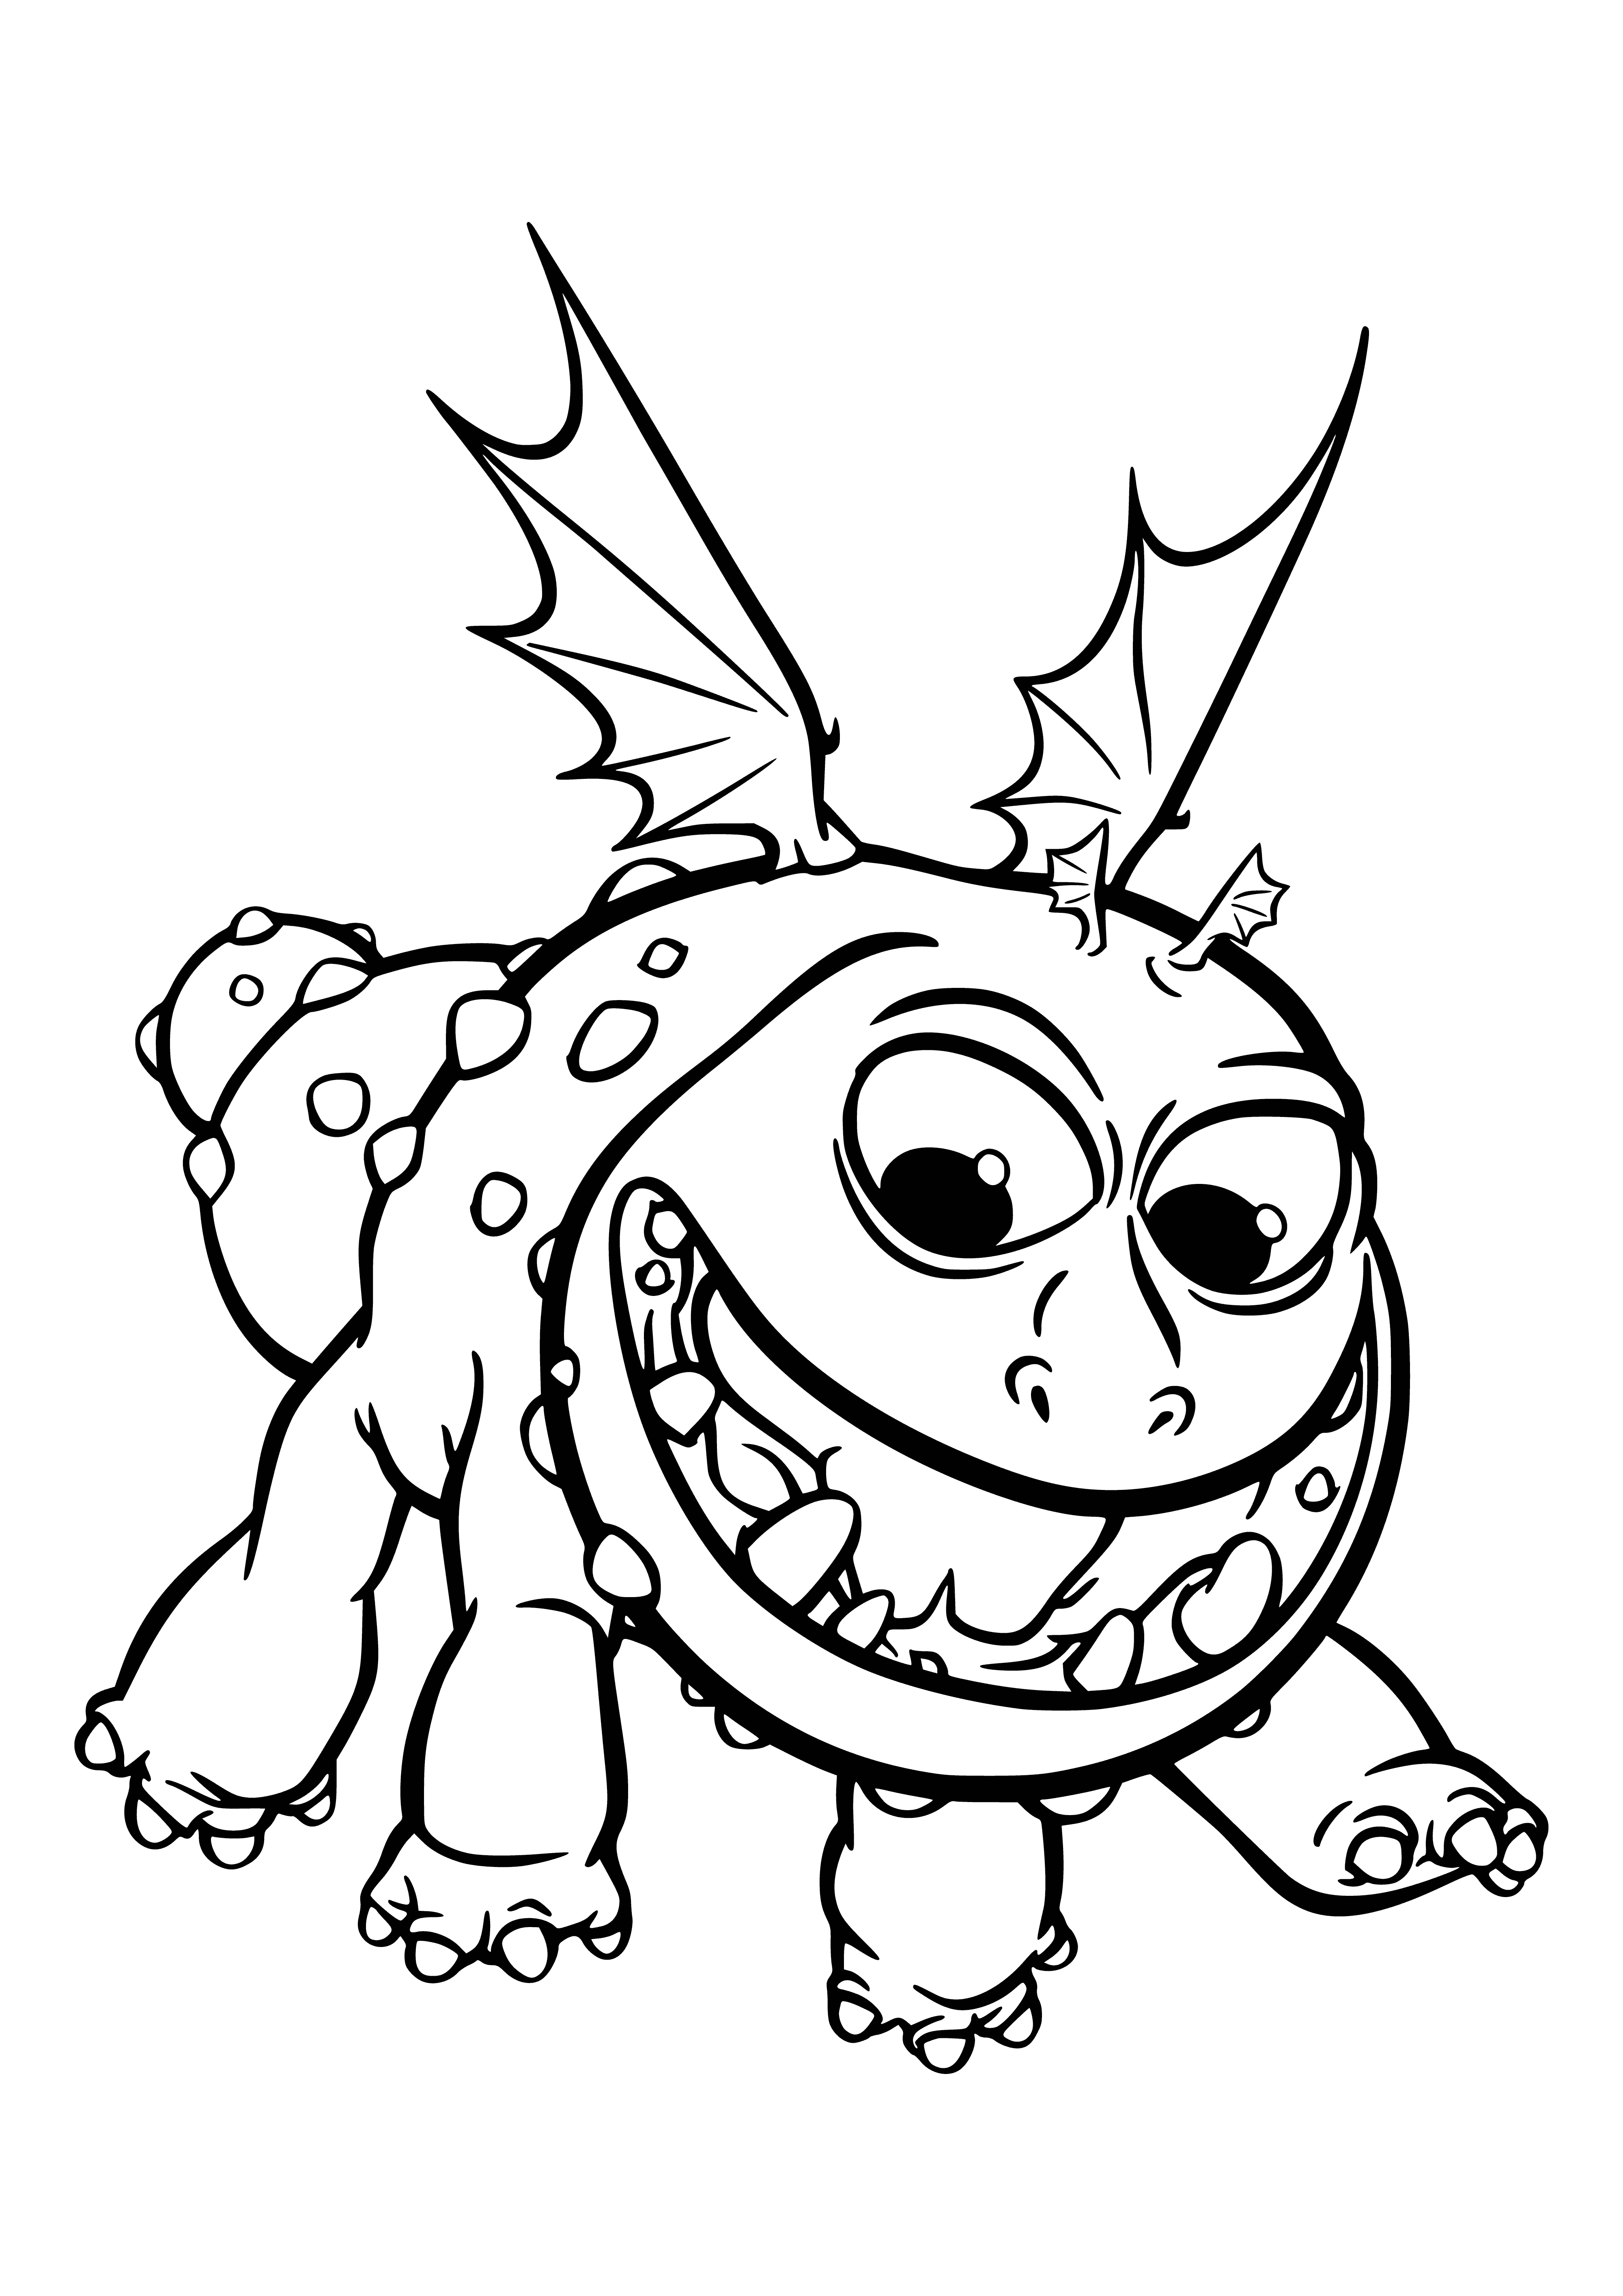 Little Dragon Fish coloring page